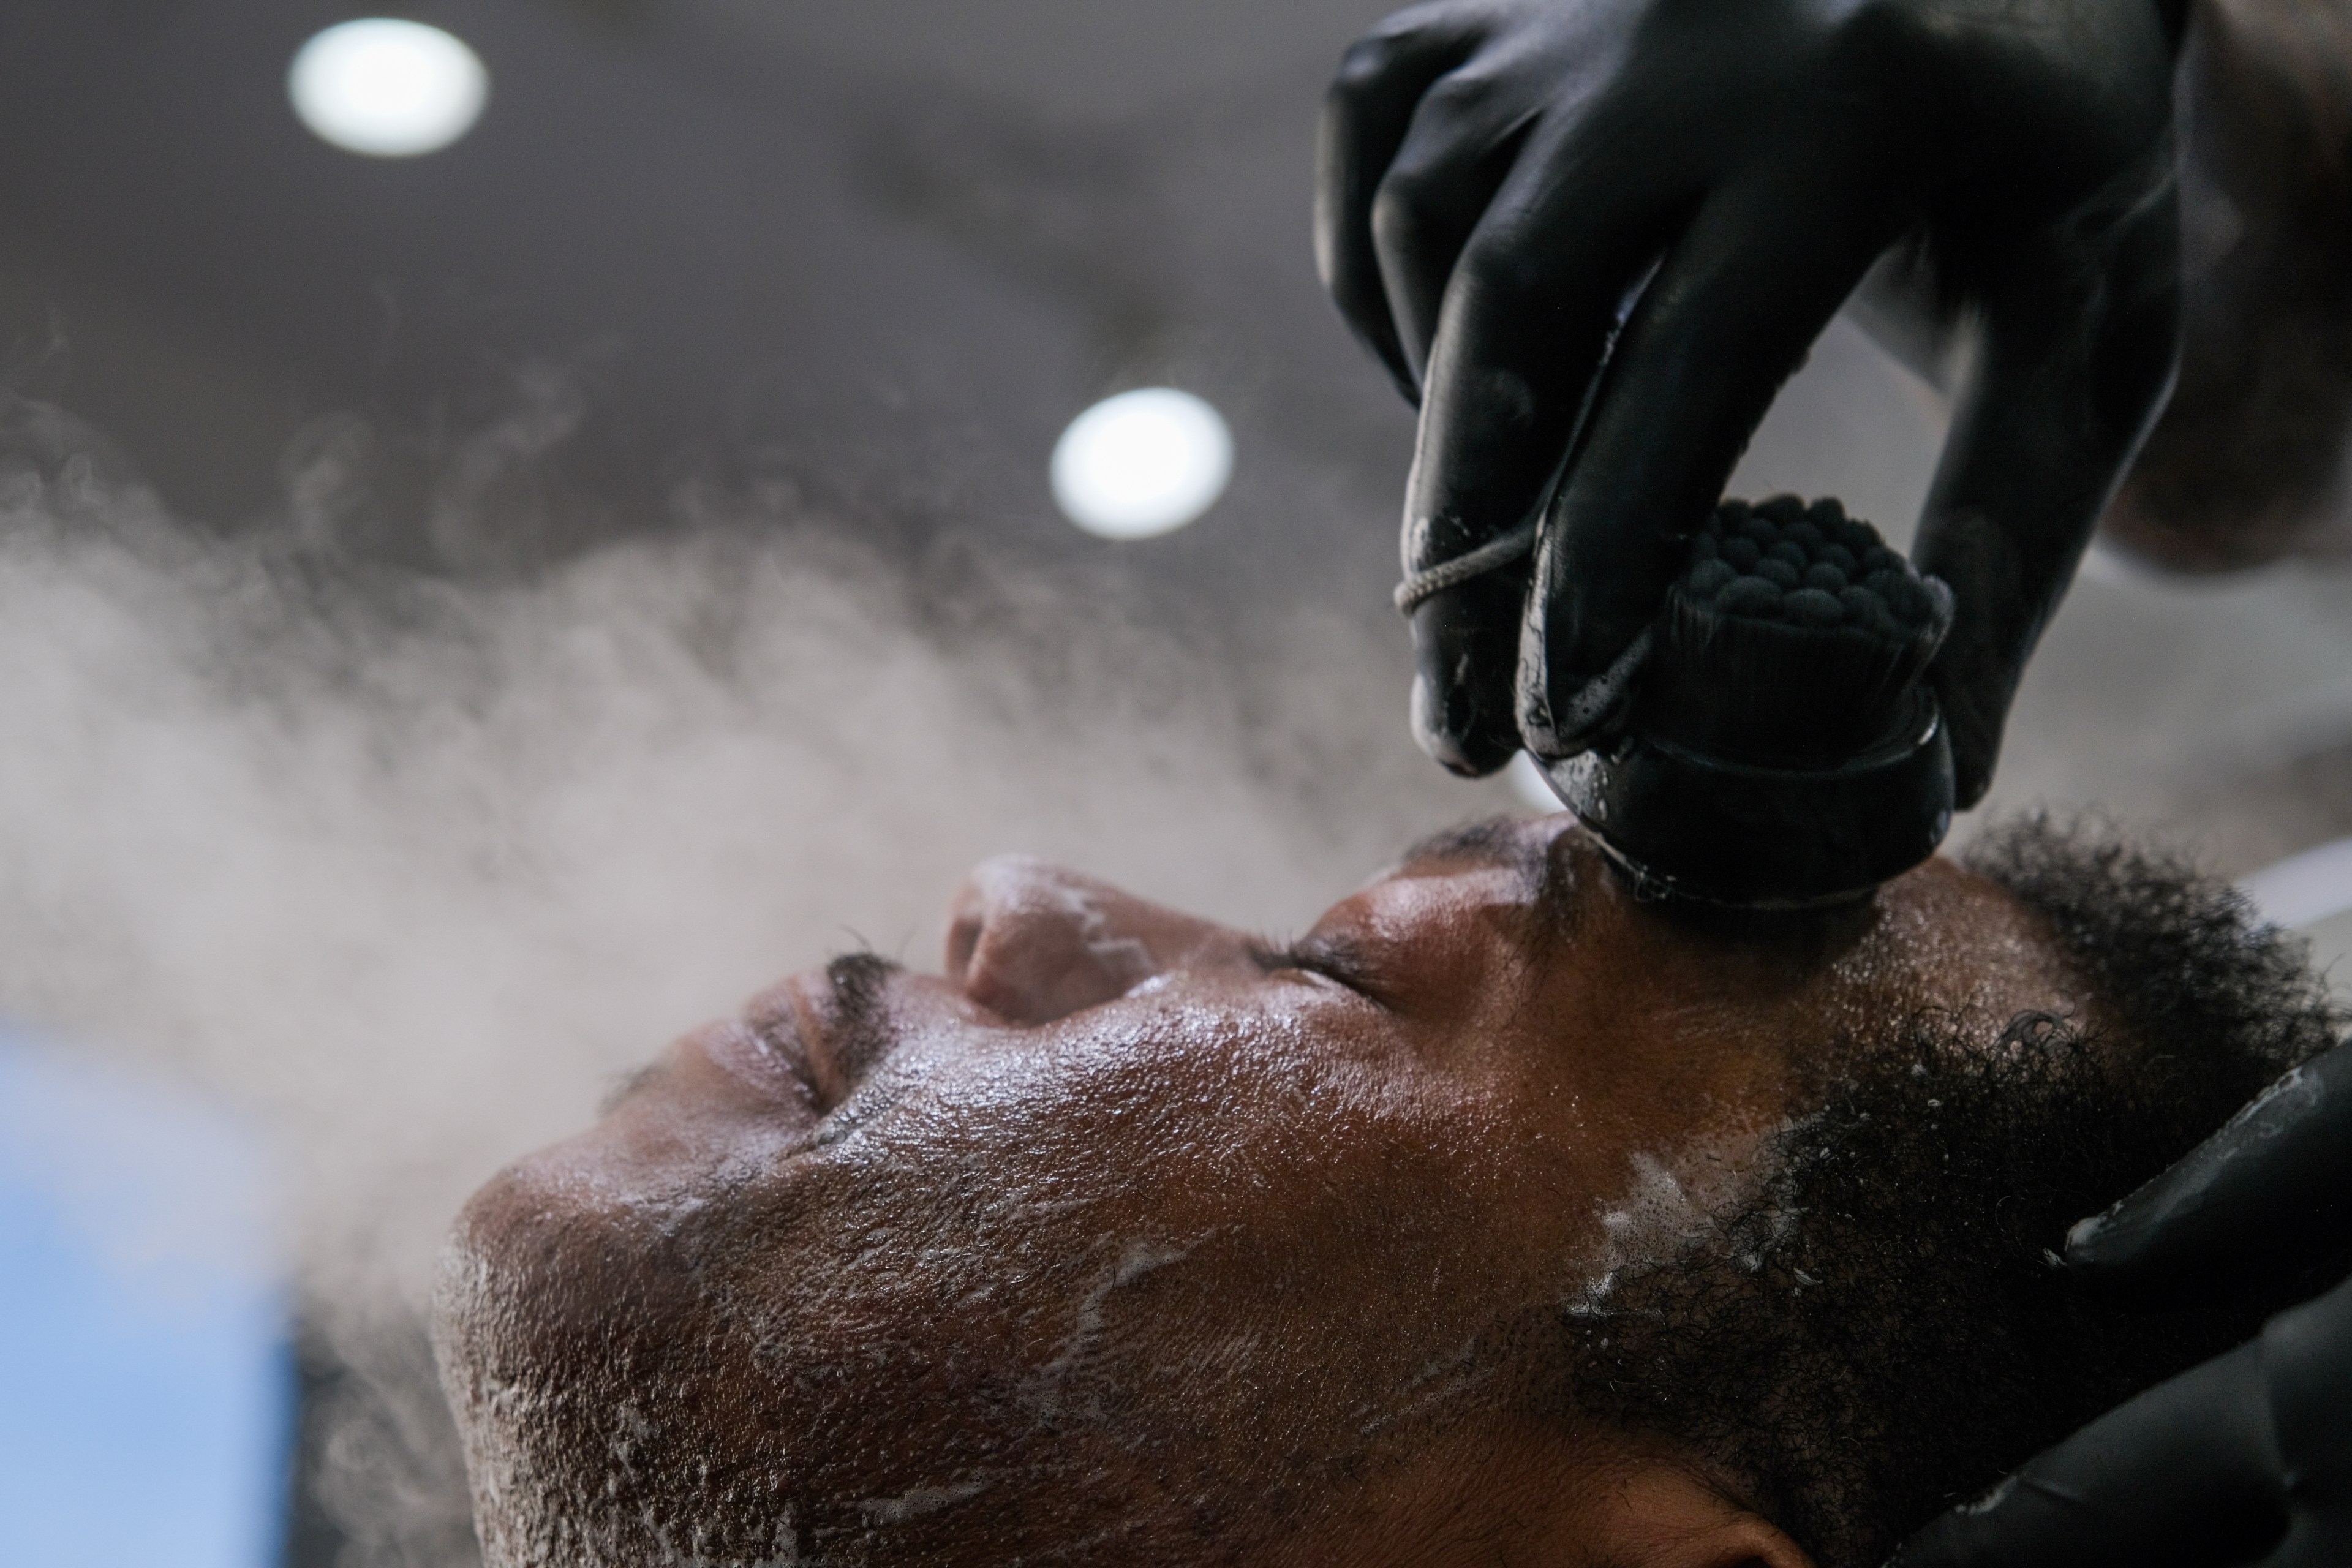 A person receiving a shave; a cloud of talcum powder surrounds their face as the barber works.